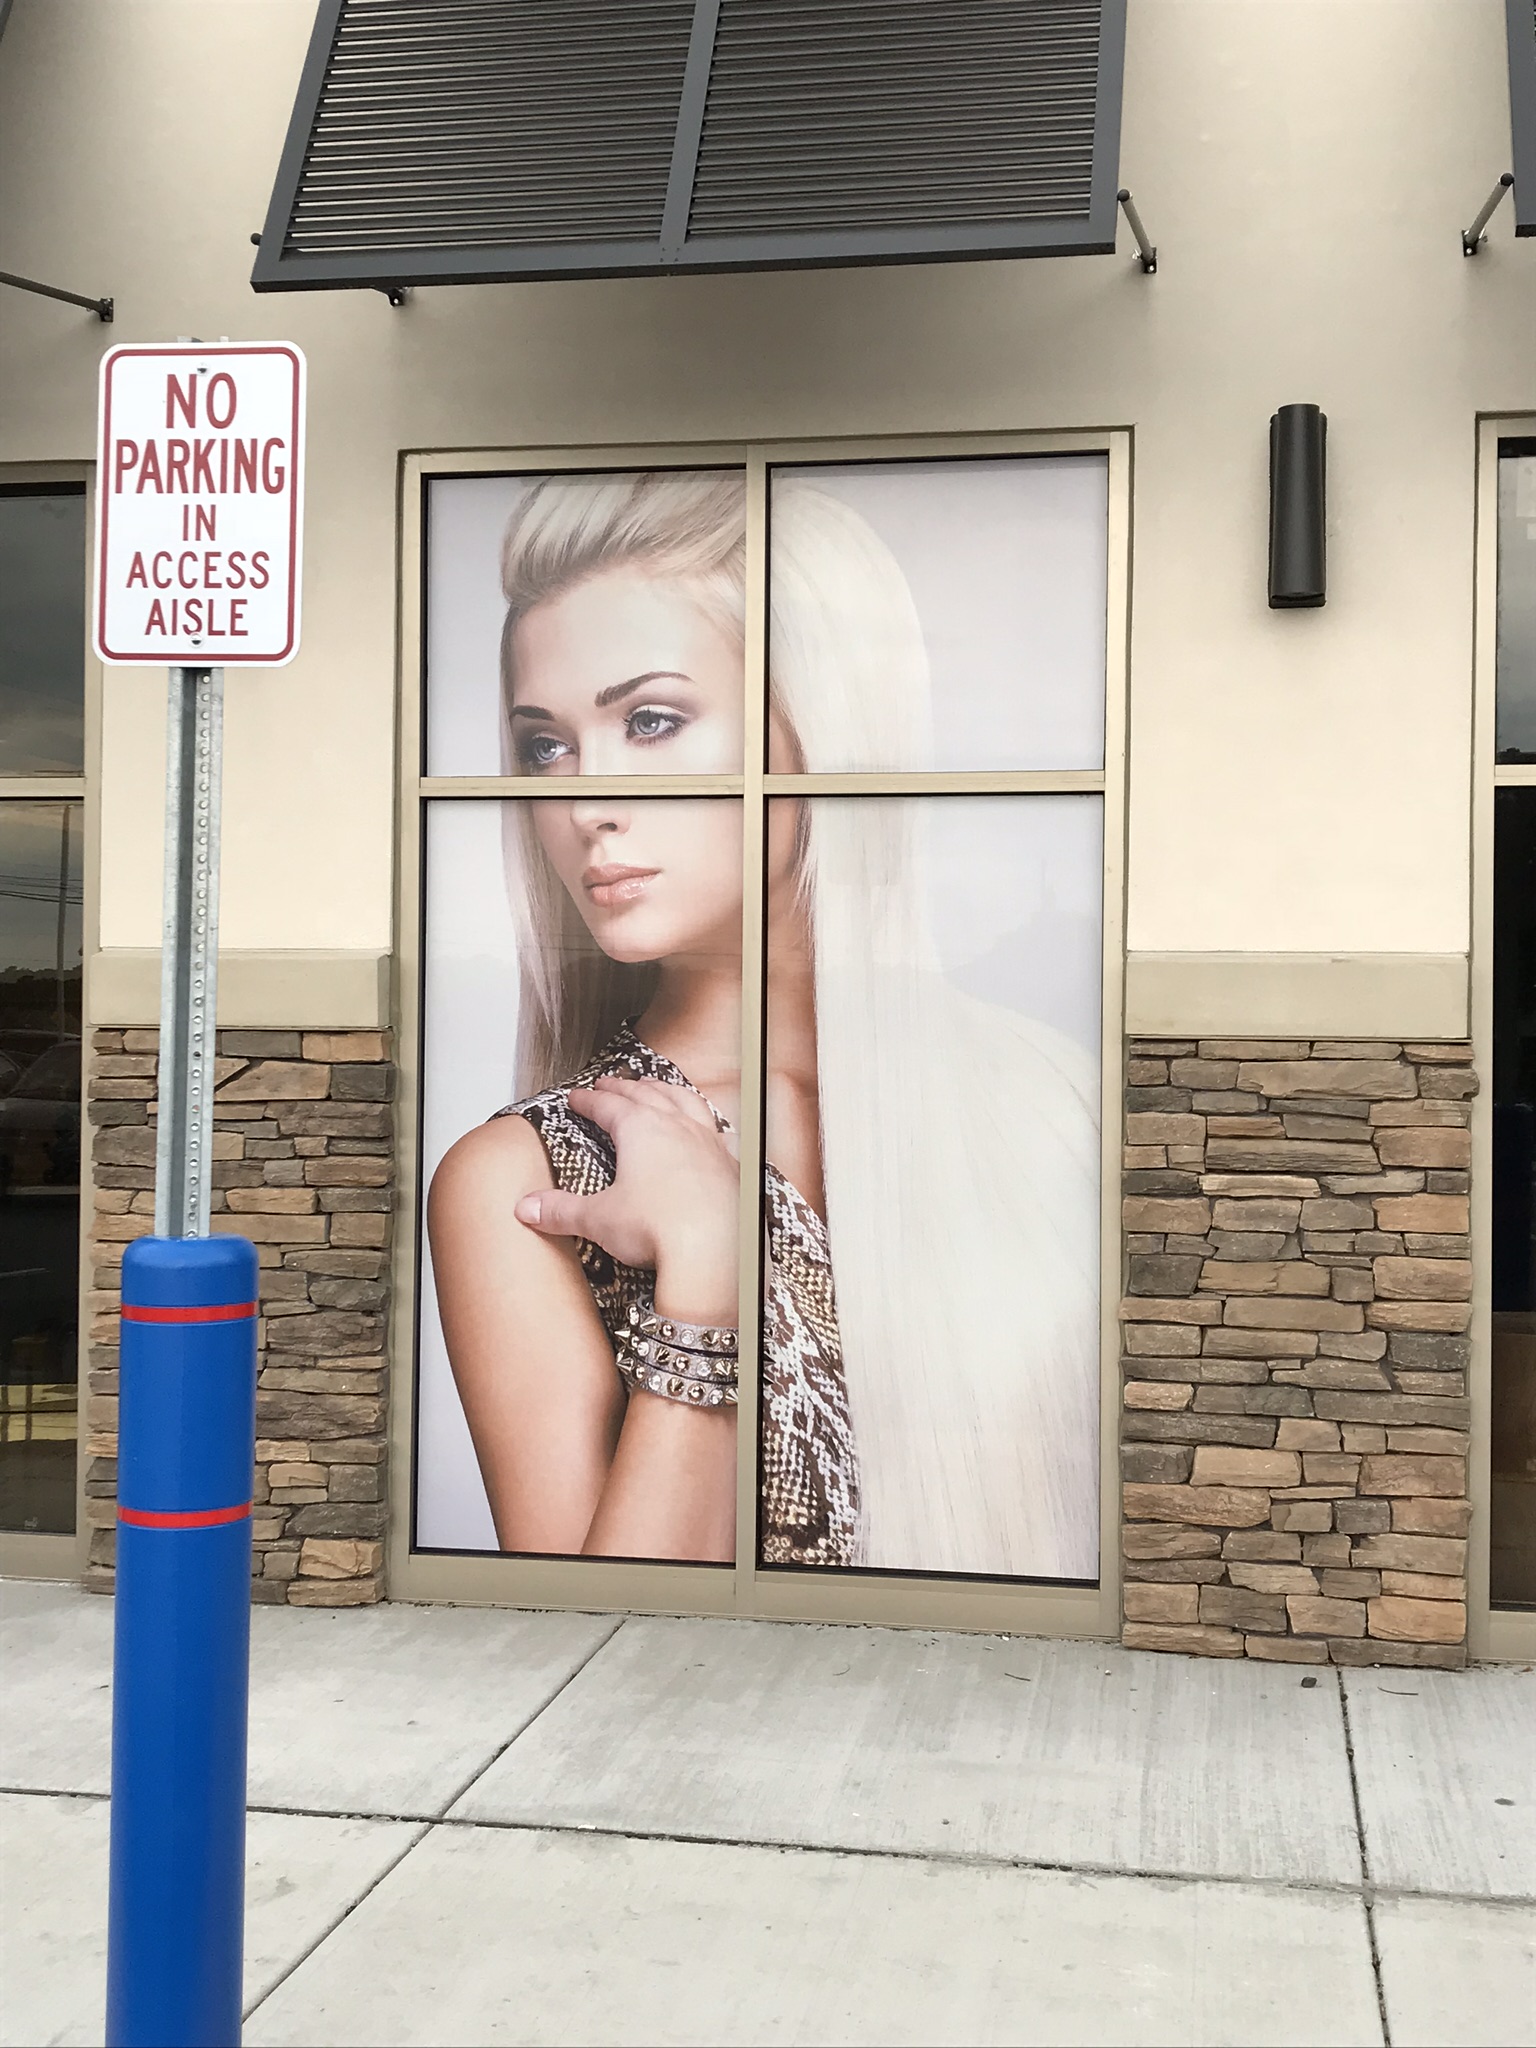 Curb graphic on a window featuring a woman with long blonde hair 